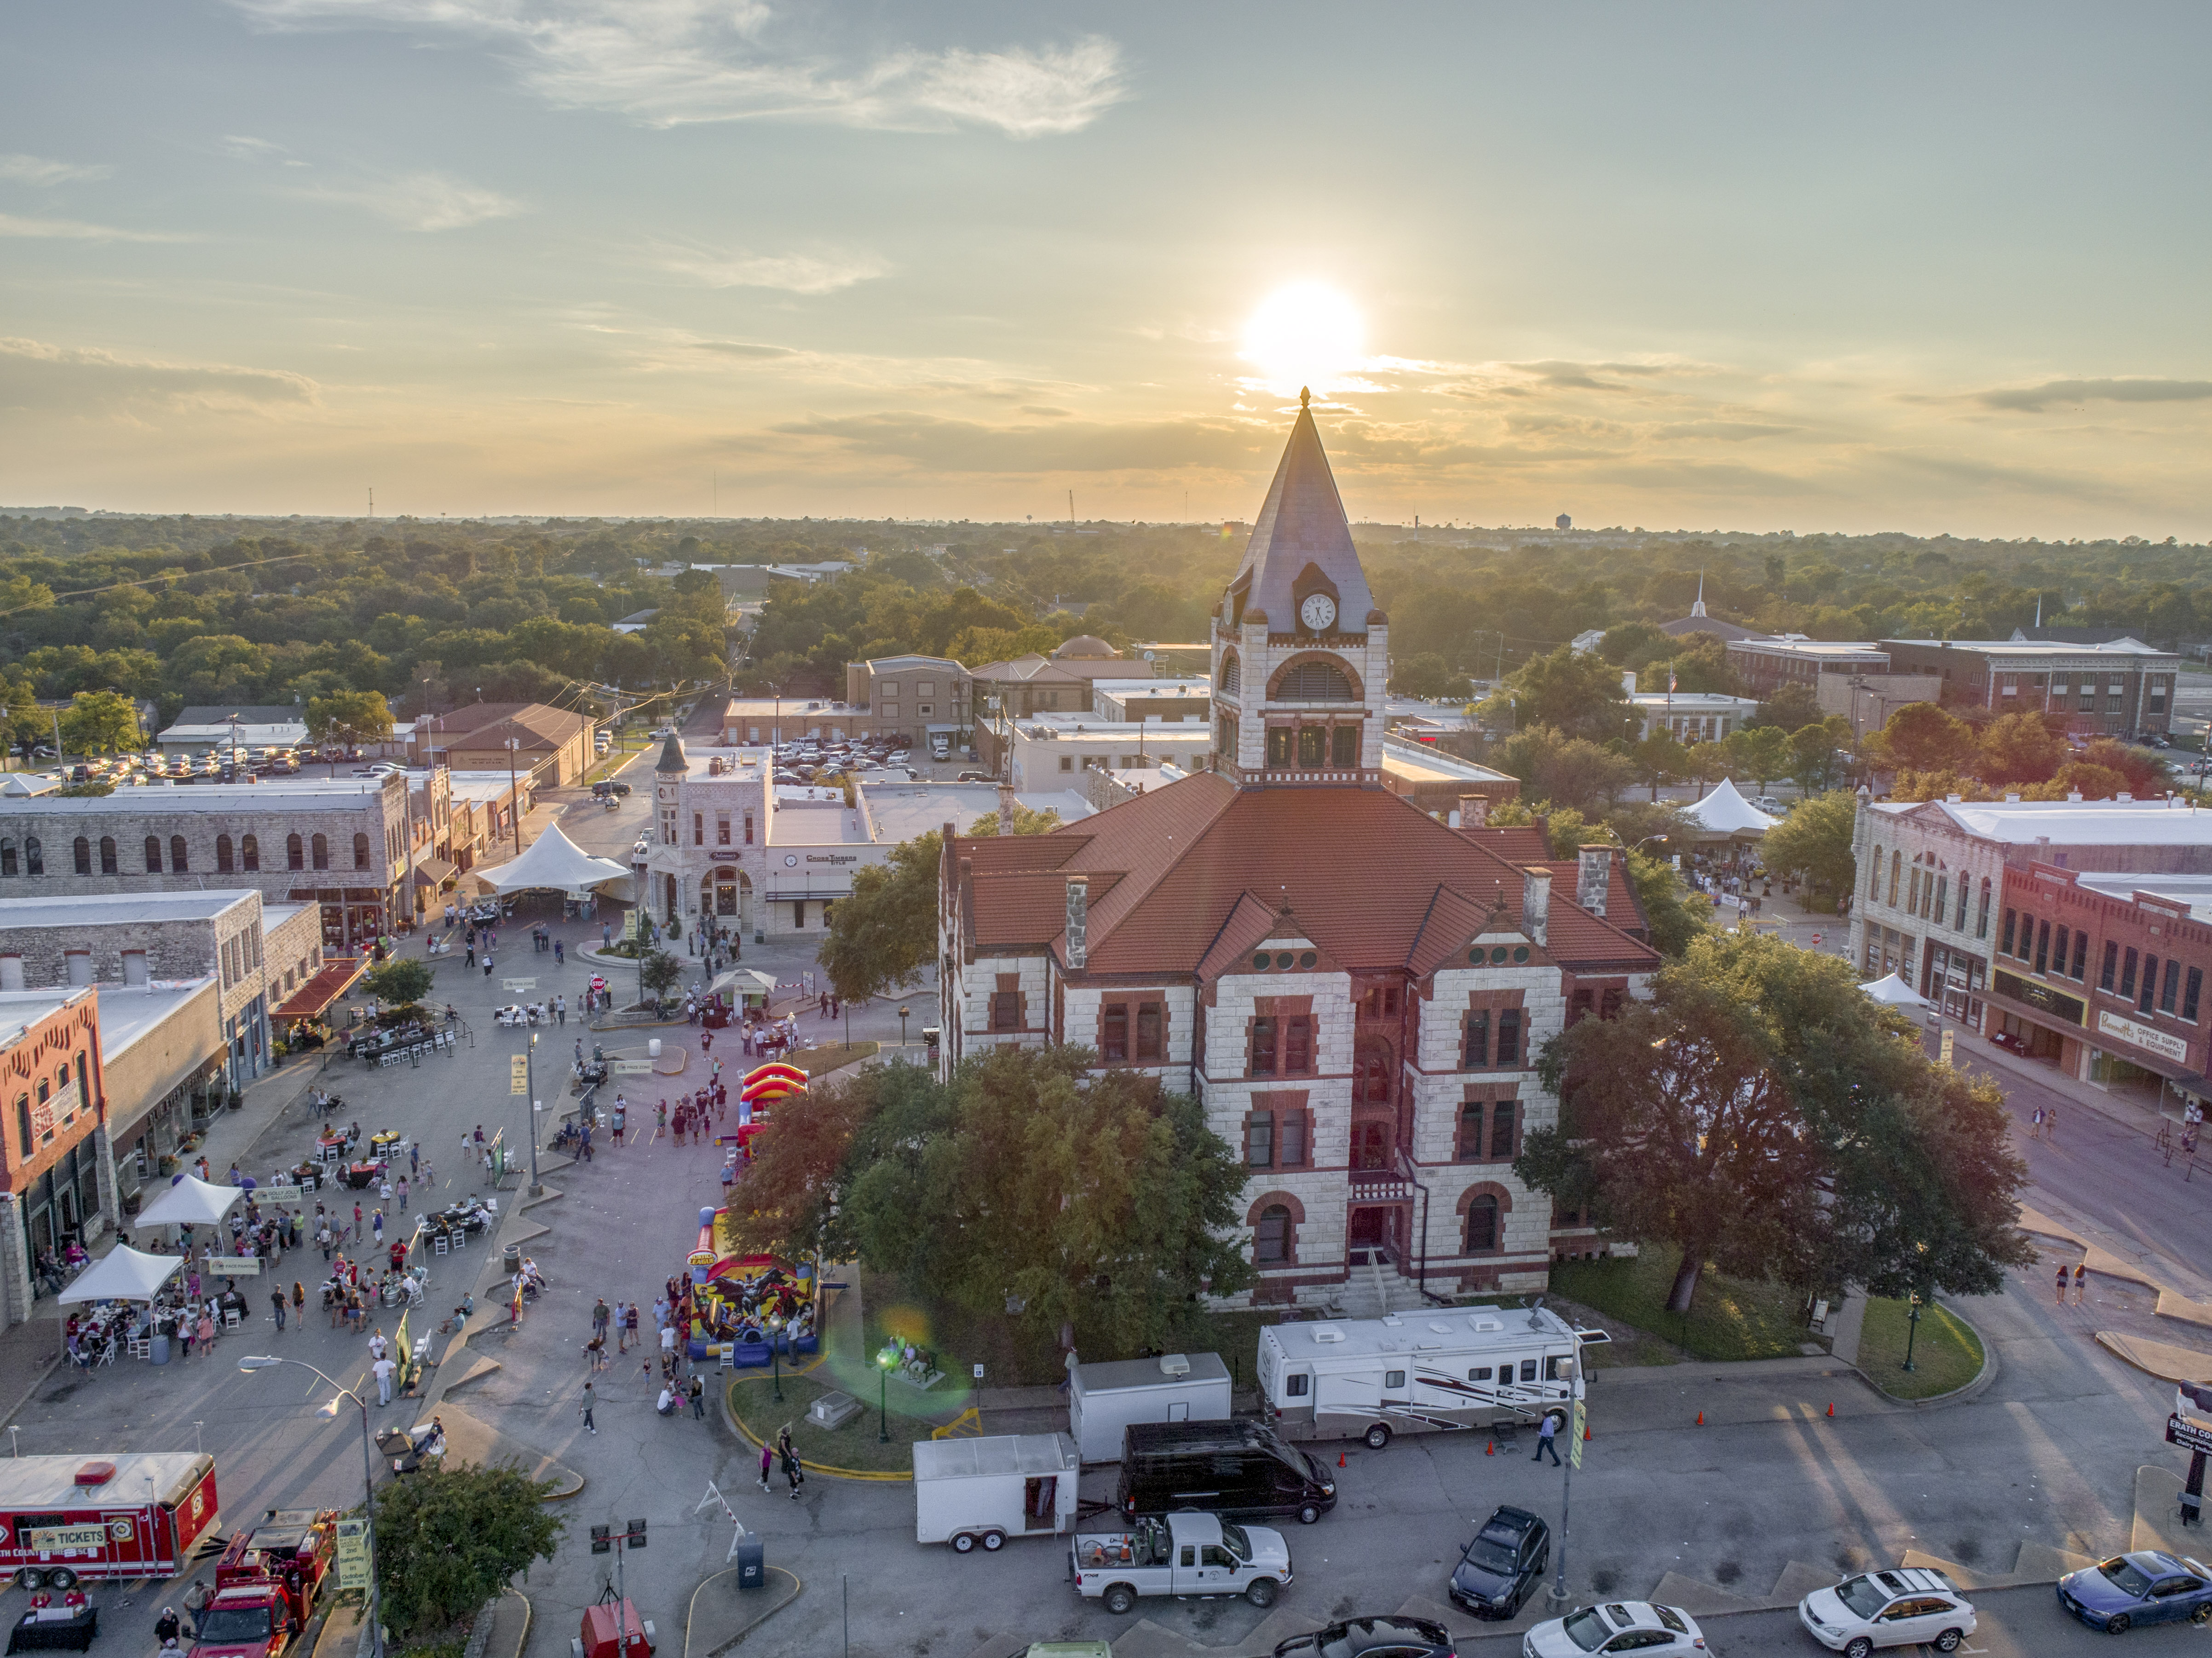 2017 Sundown on the Square in Stephenville